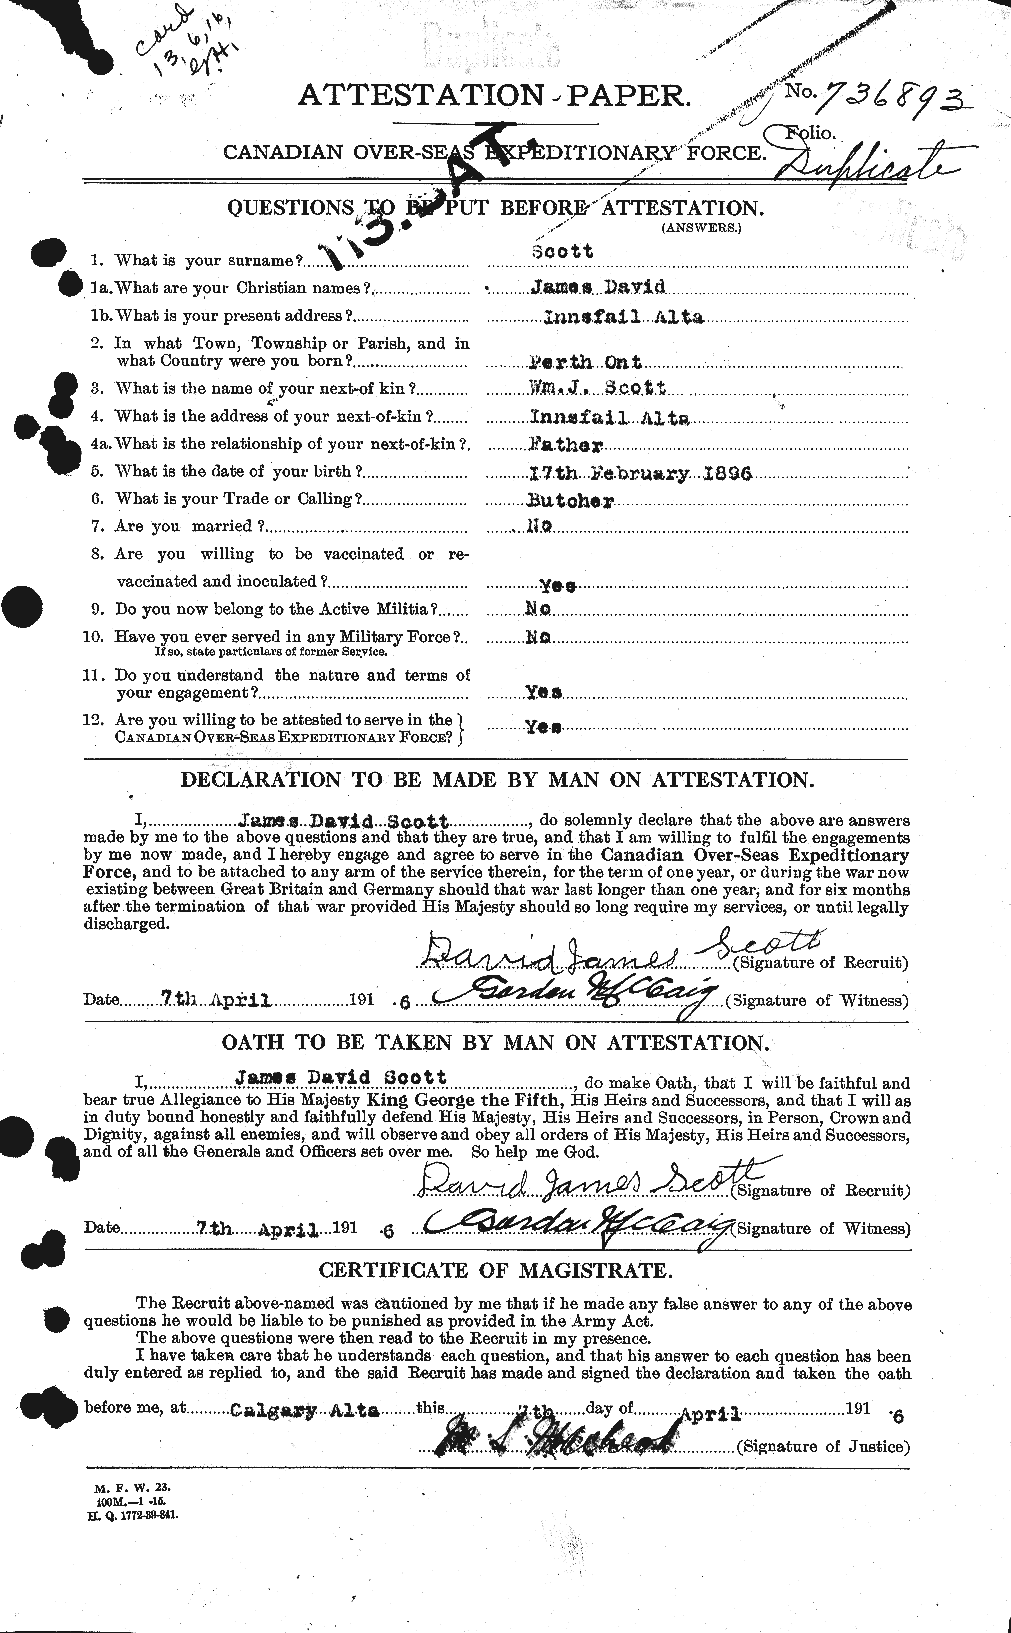 Personnel Records of the First World War - CEF 085488a